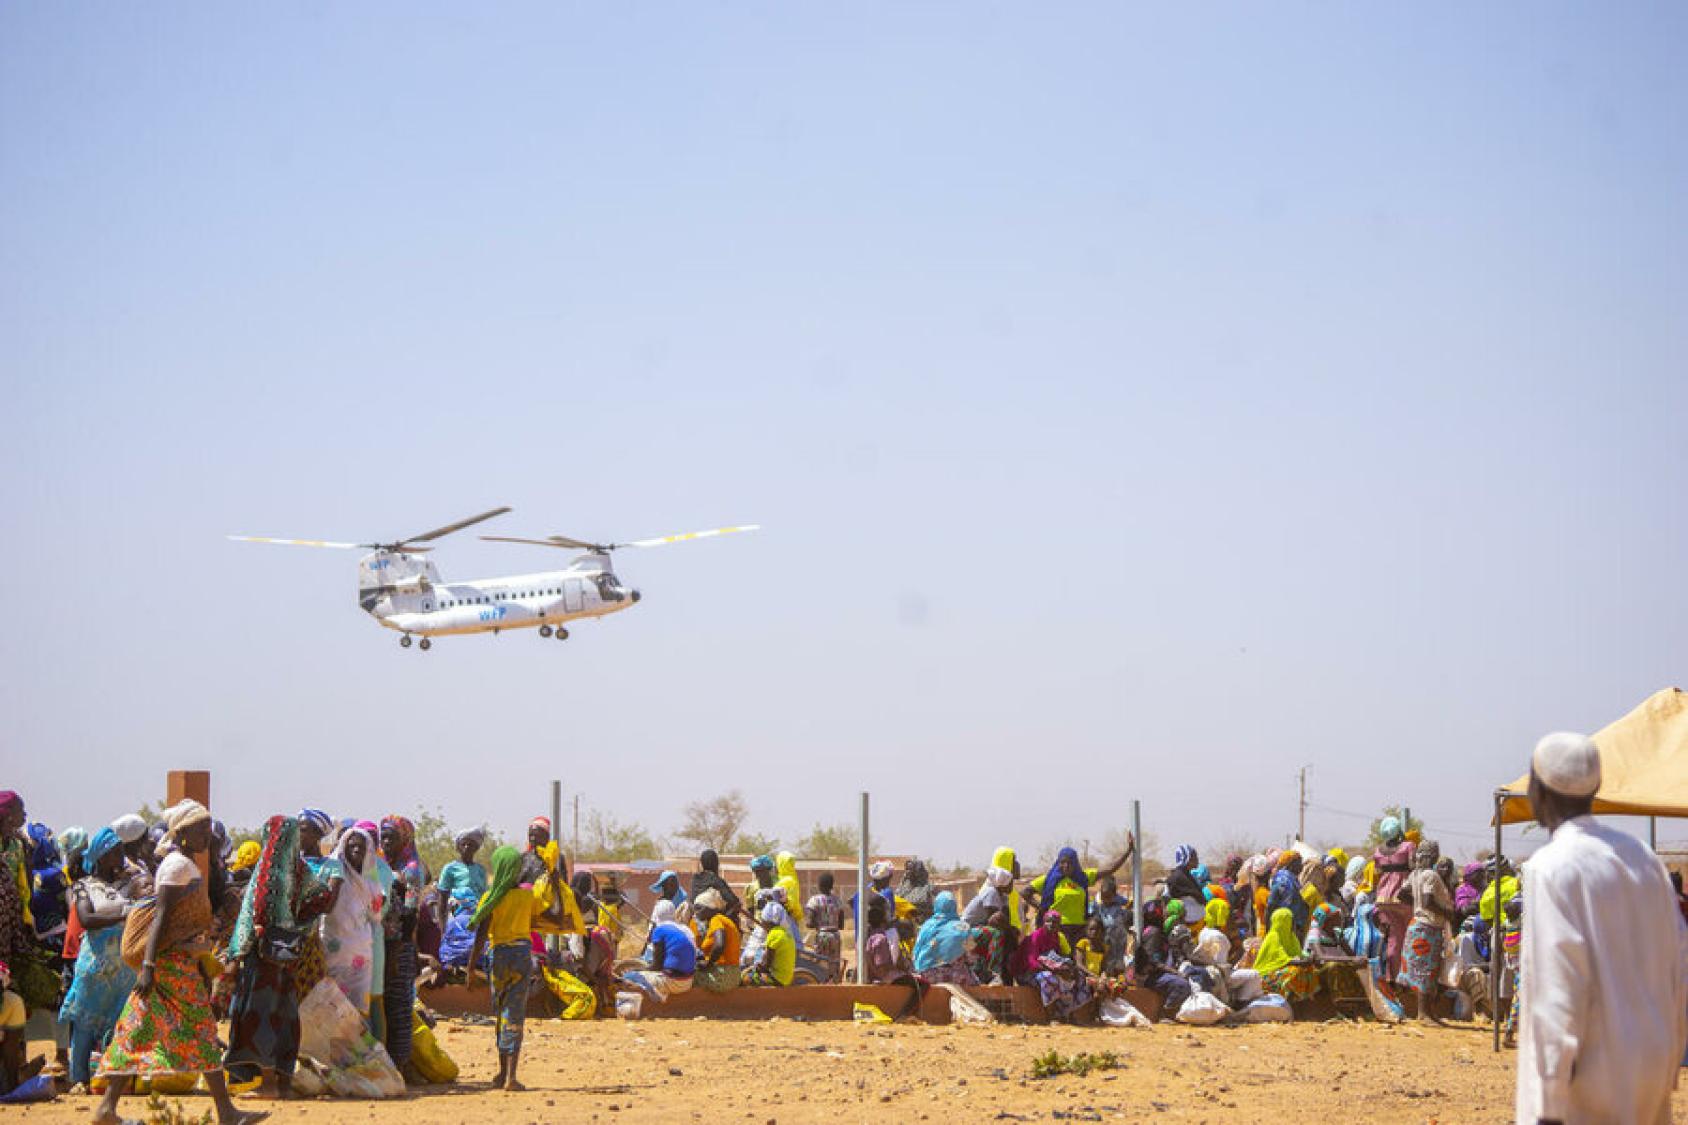 A low propeller style plane flies over a dry land with groups of people in colourful clothes gathered